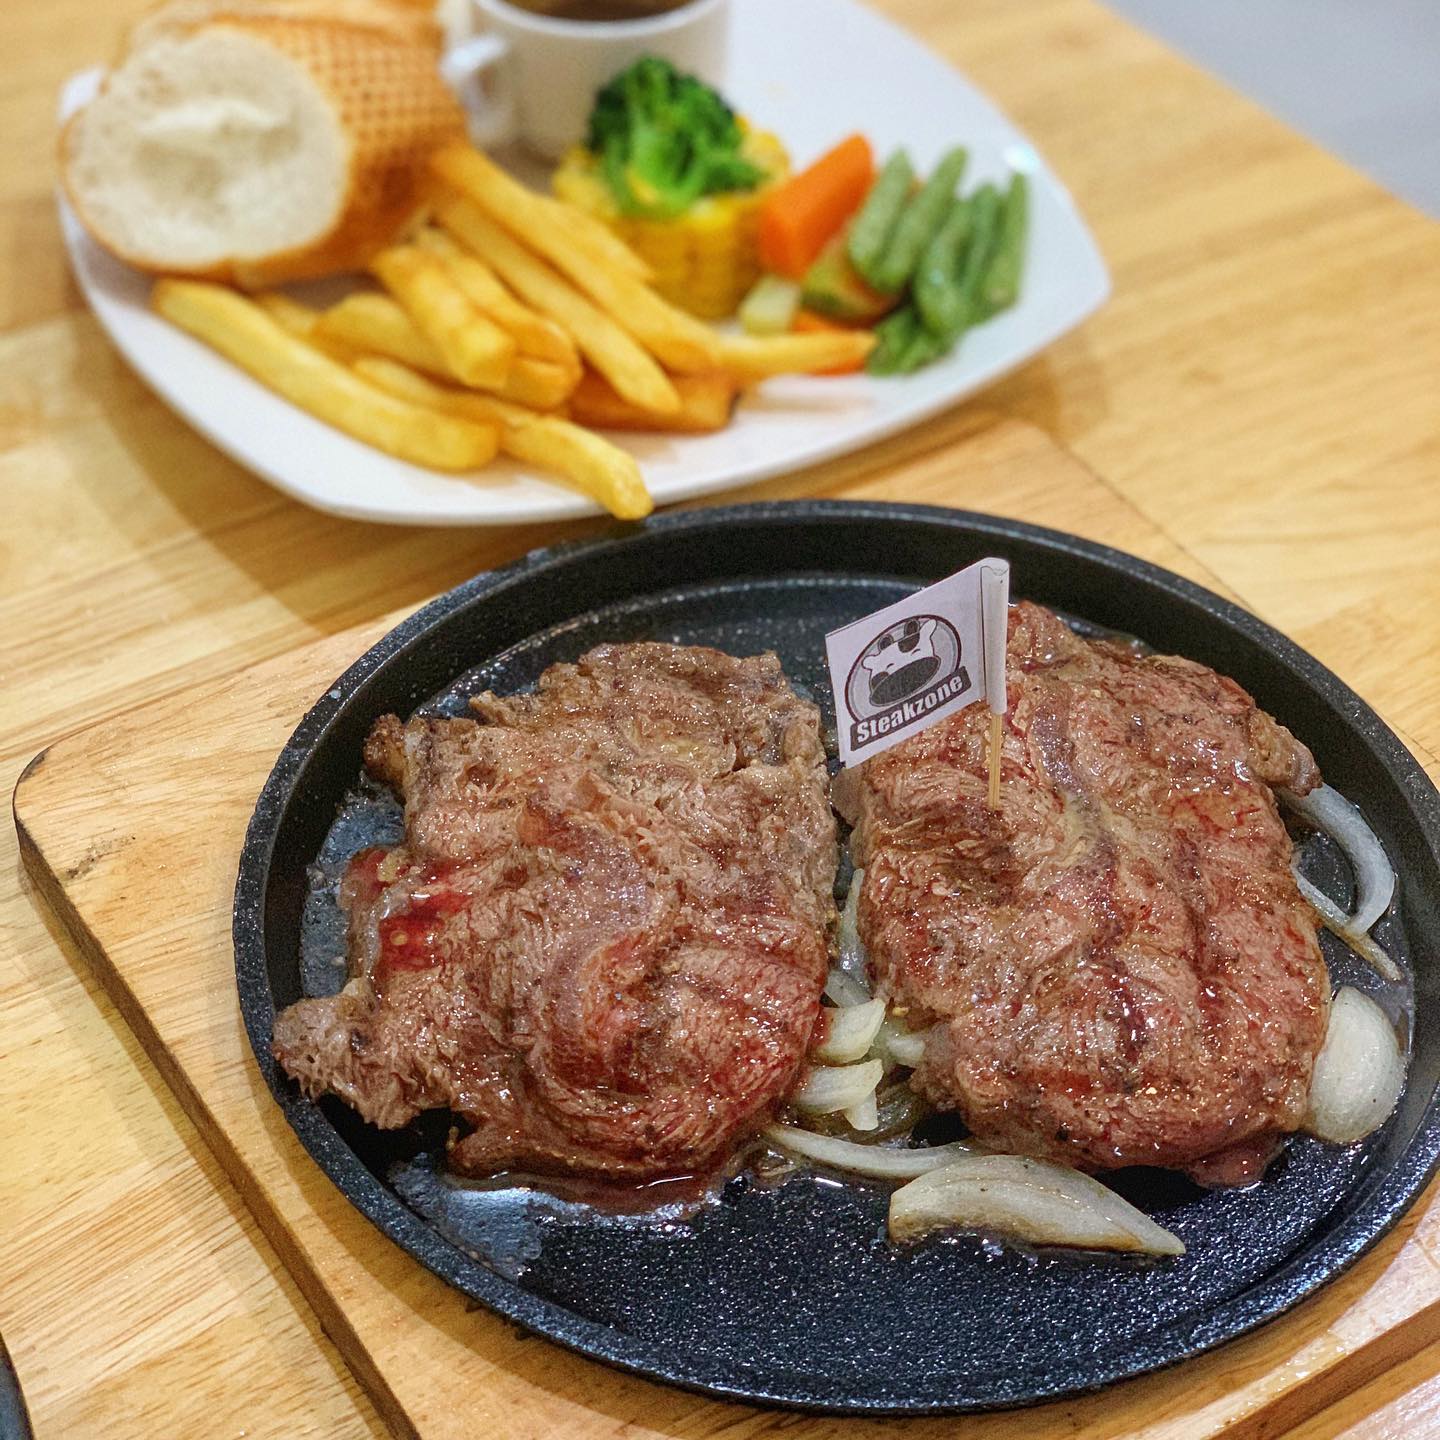 Although it is a popular beef restaurant, the dishes are still to a certain extent.  Photo: @ t.beatrix_